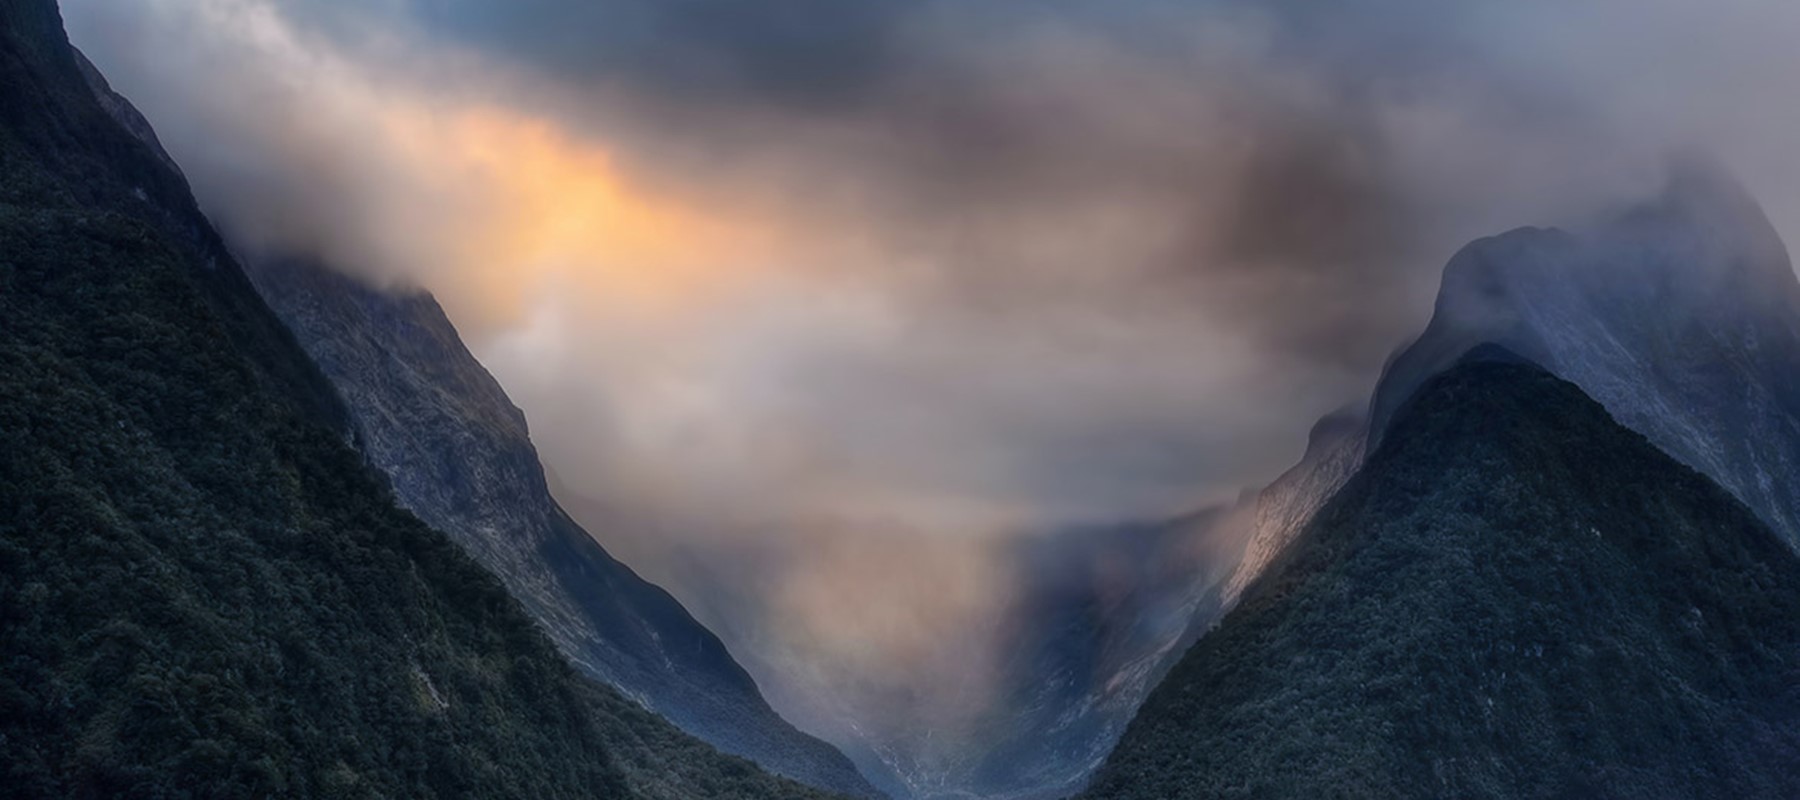 The sun breaks through grey clouds over Milford Sound between mountain peaks.